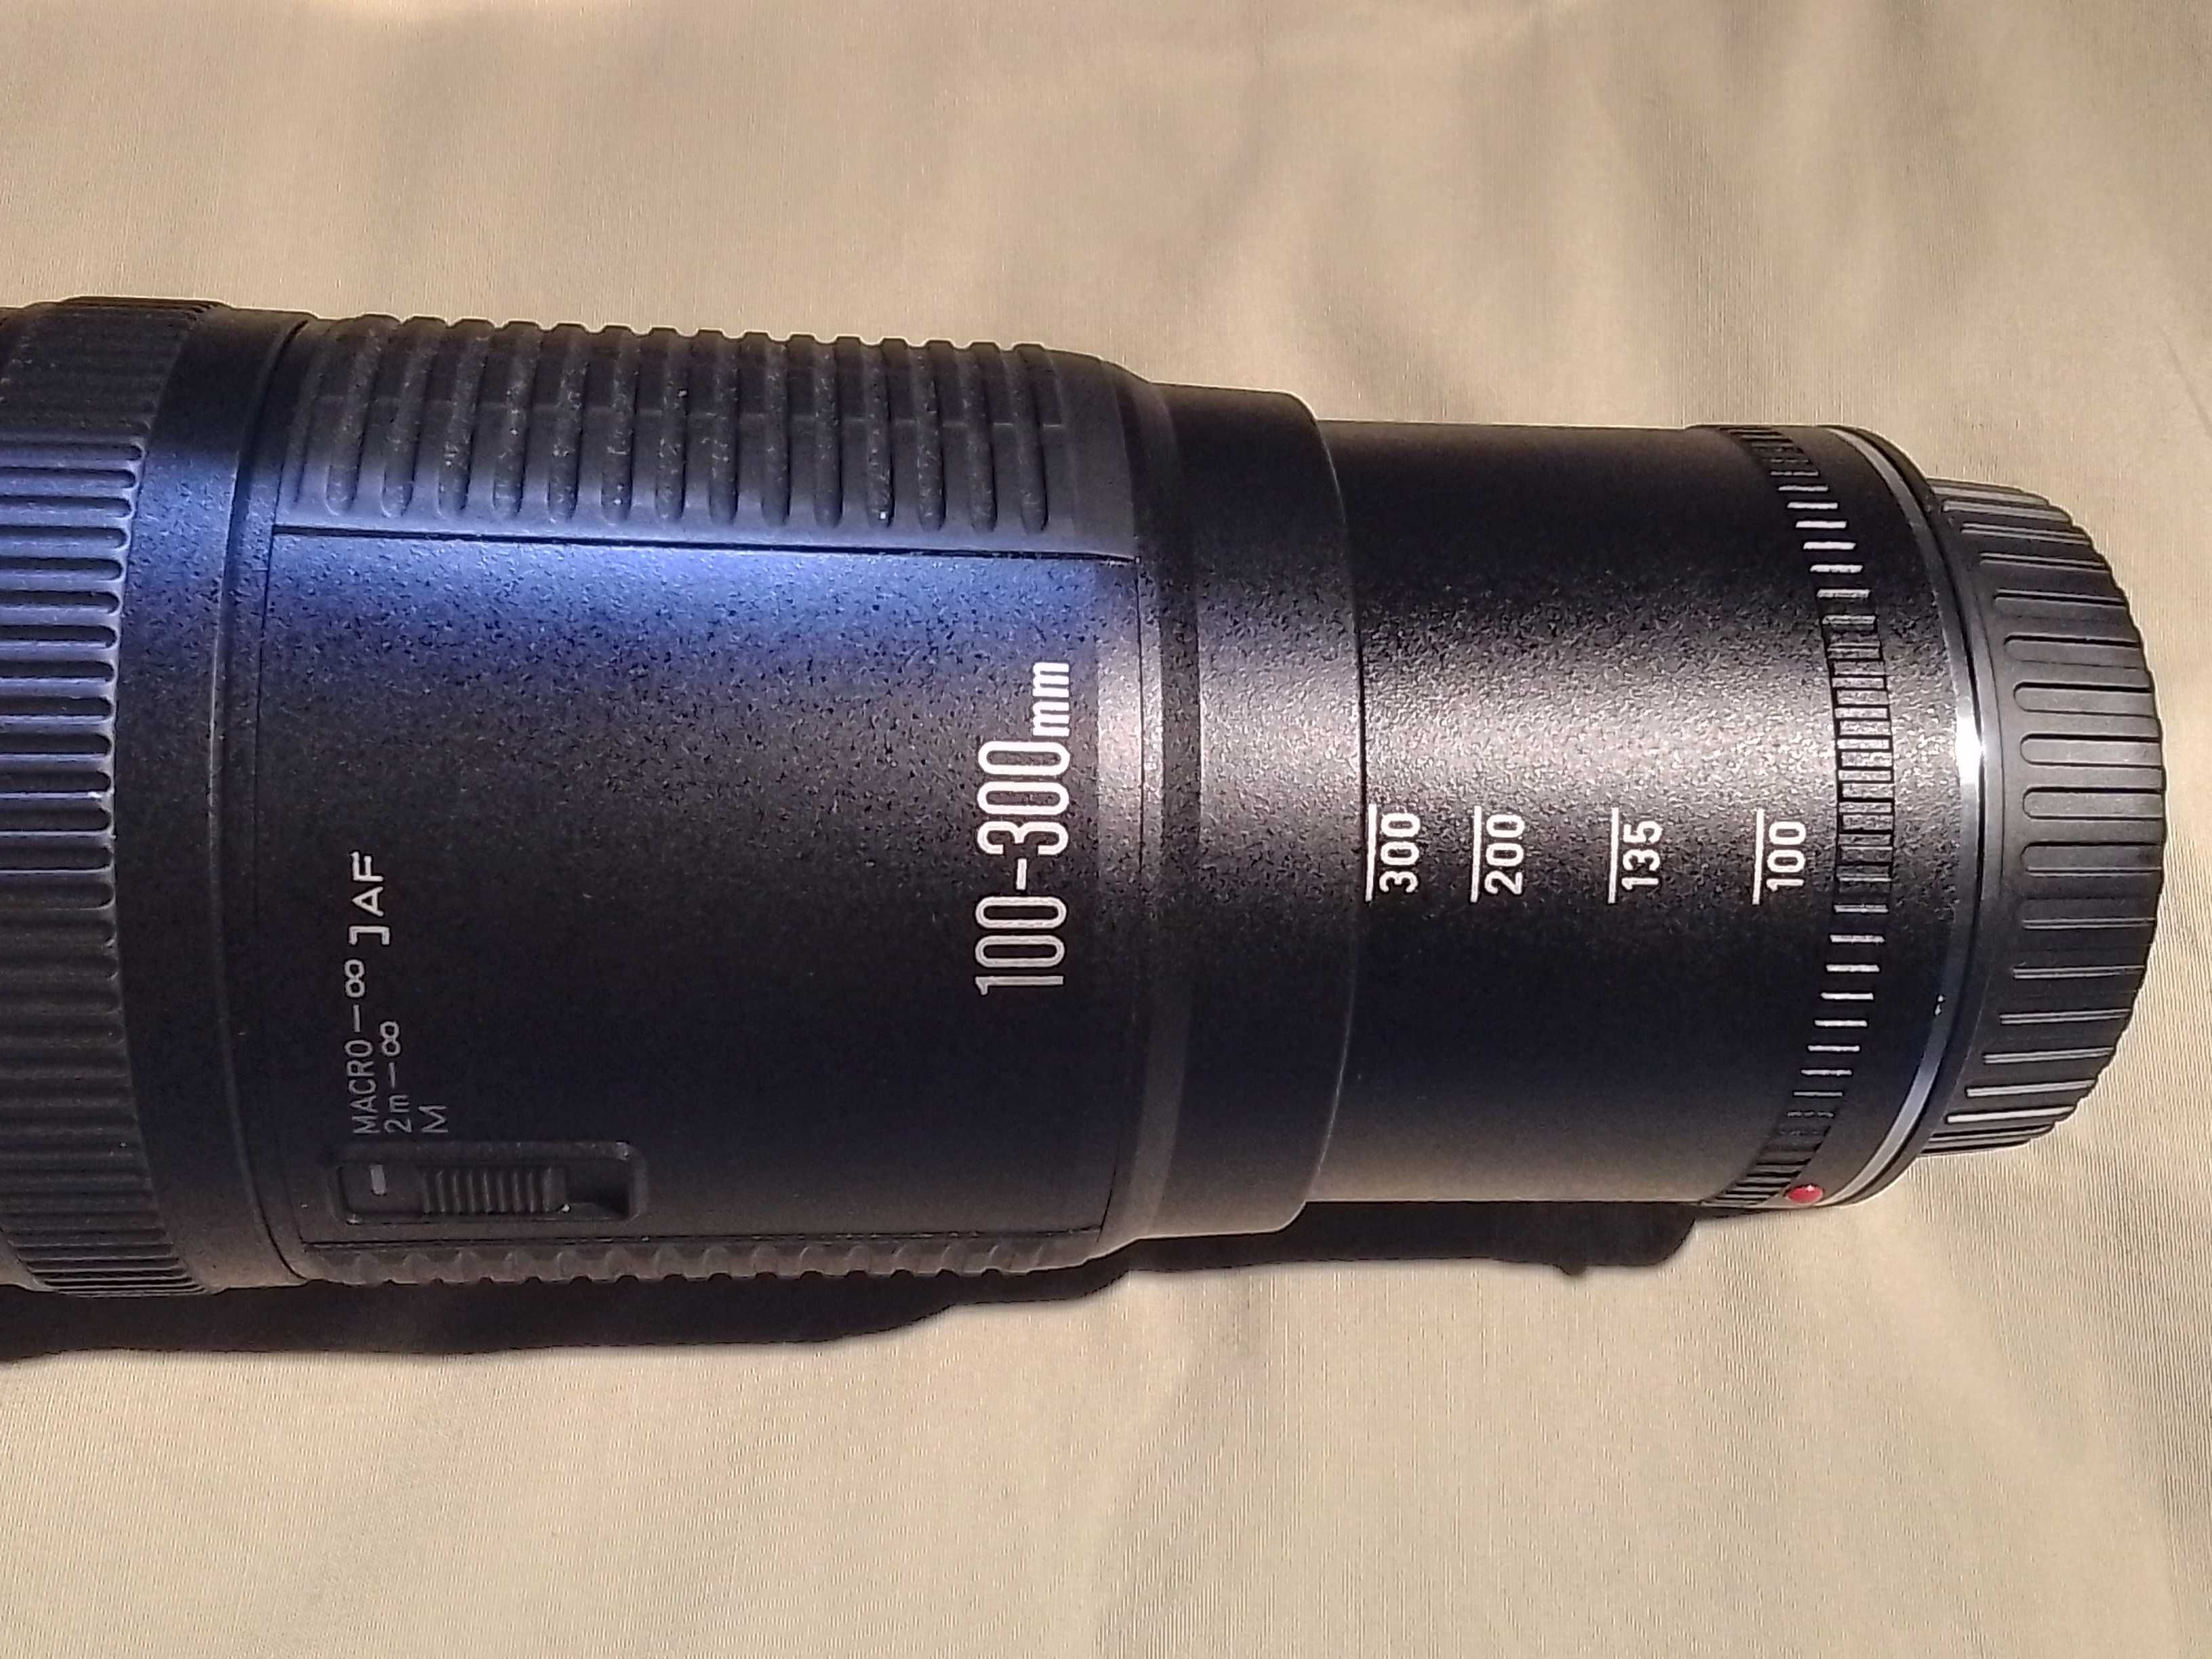 Canon zoom lens 100-300mm 1:5.6